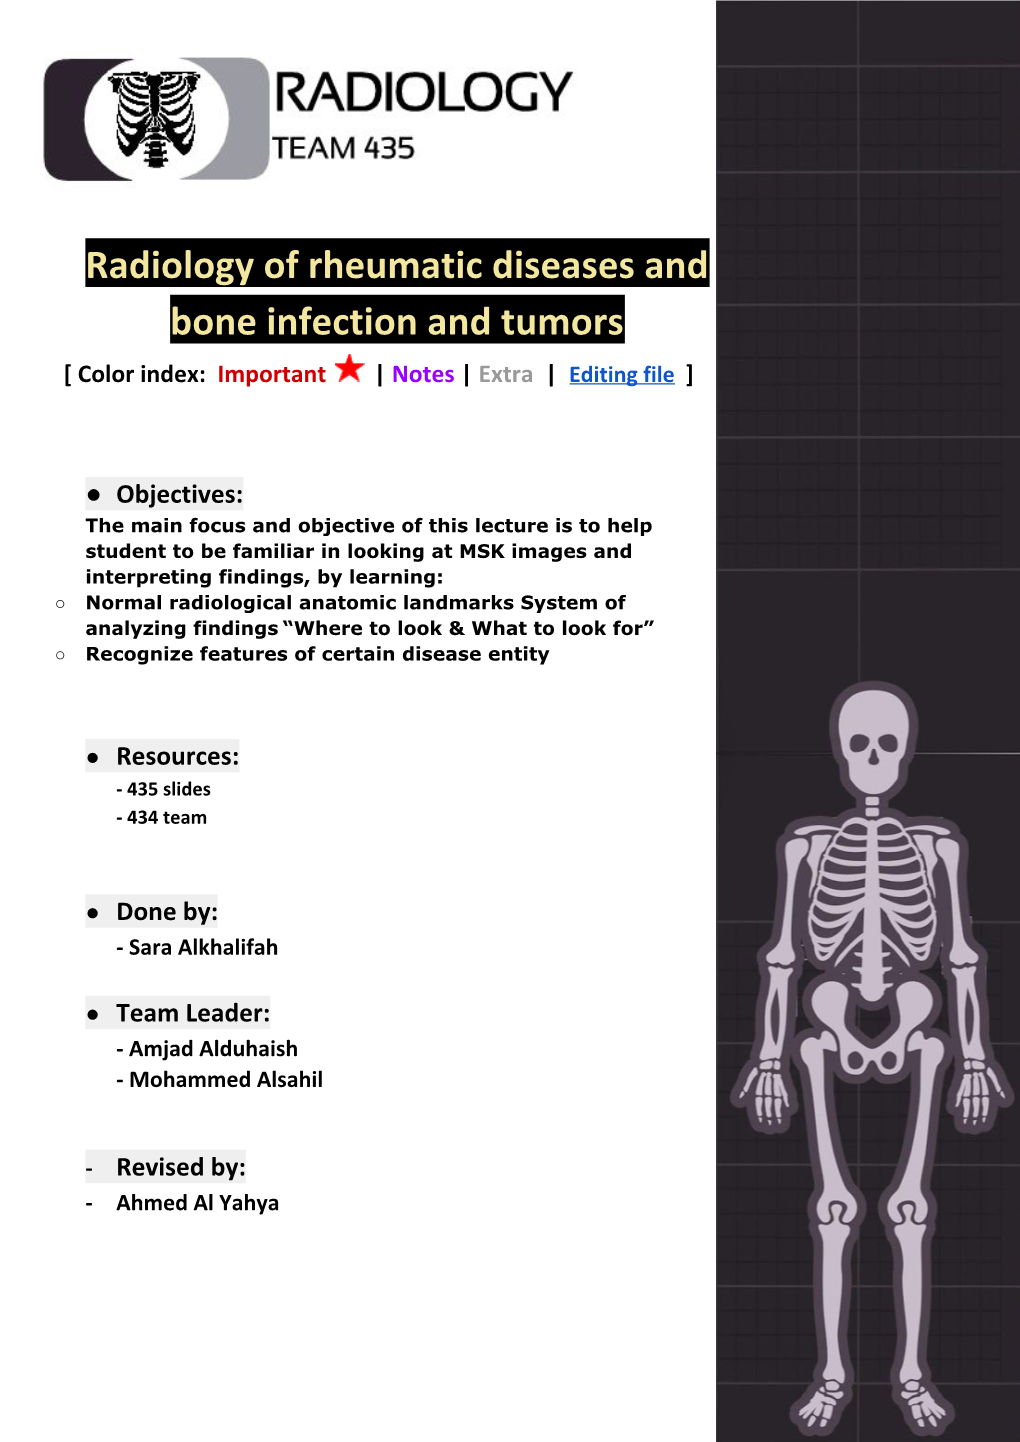 Radiology of Rheumatic Diseases and Bone Infection and Tumors